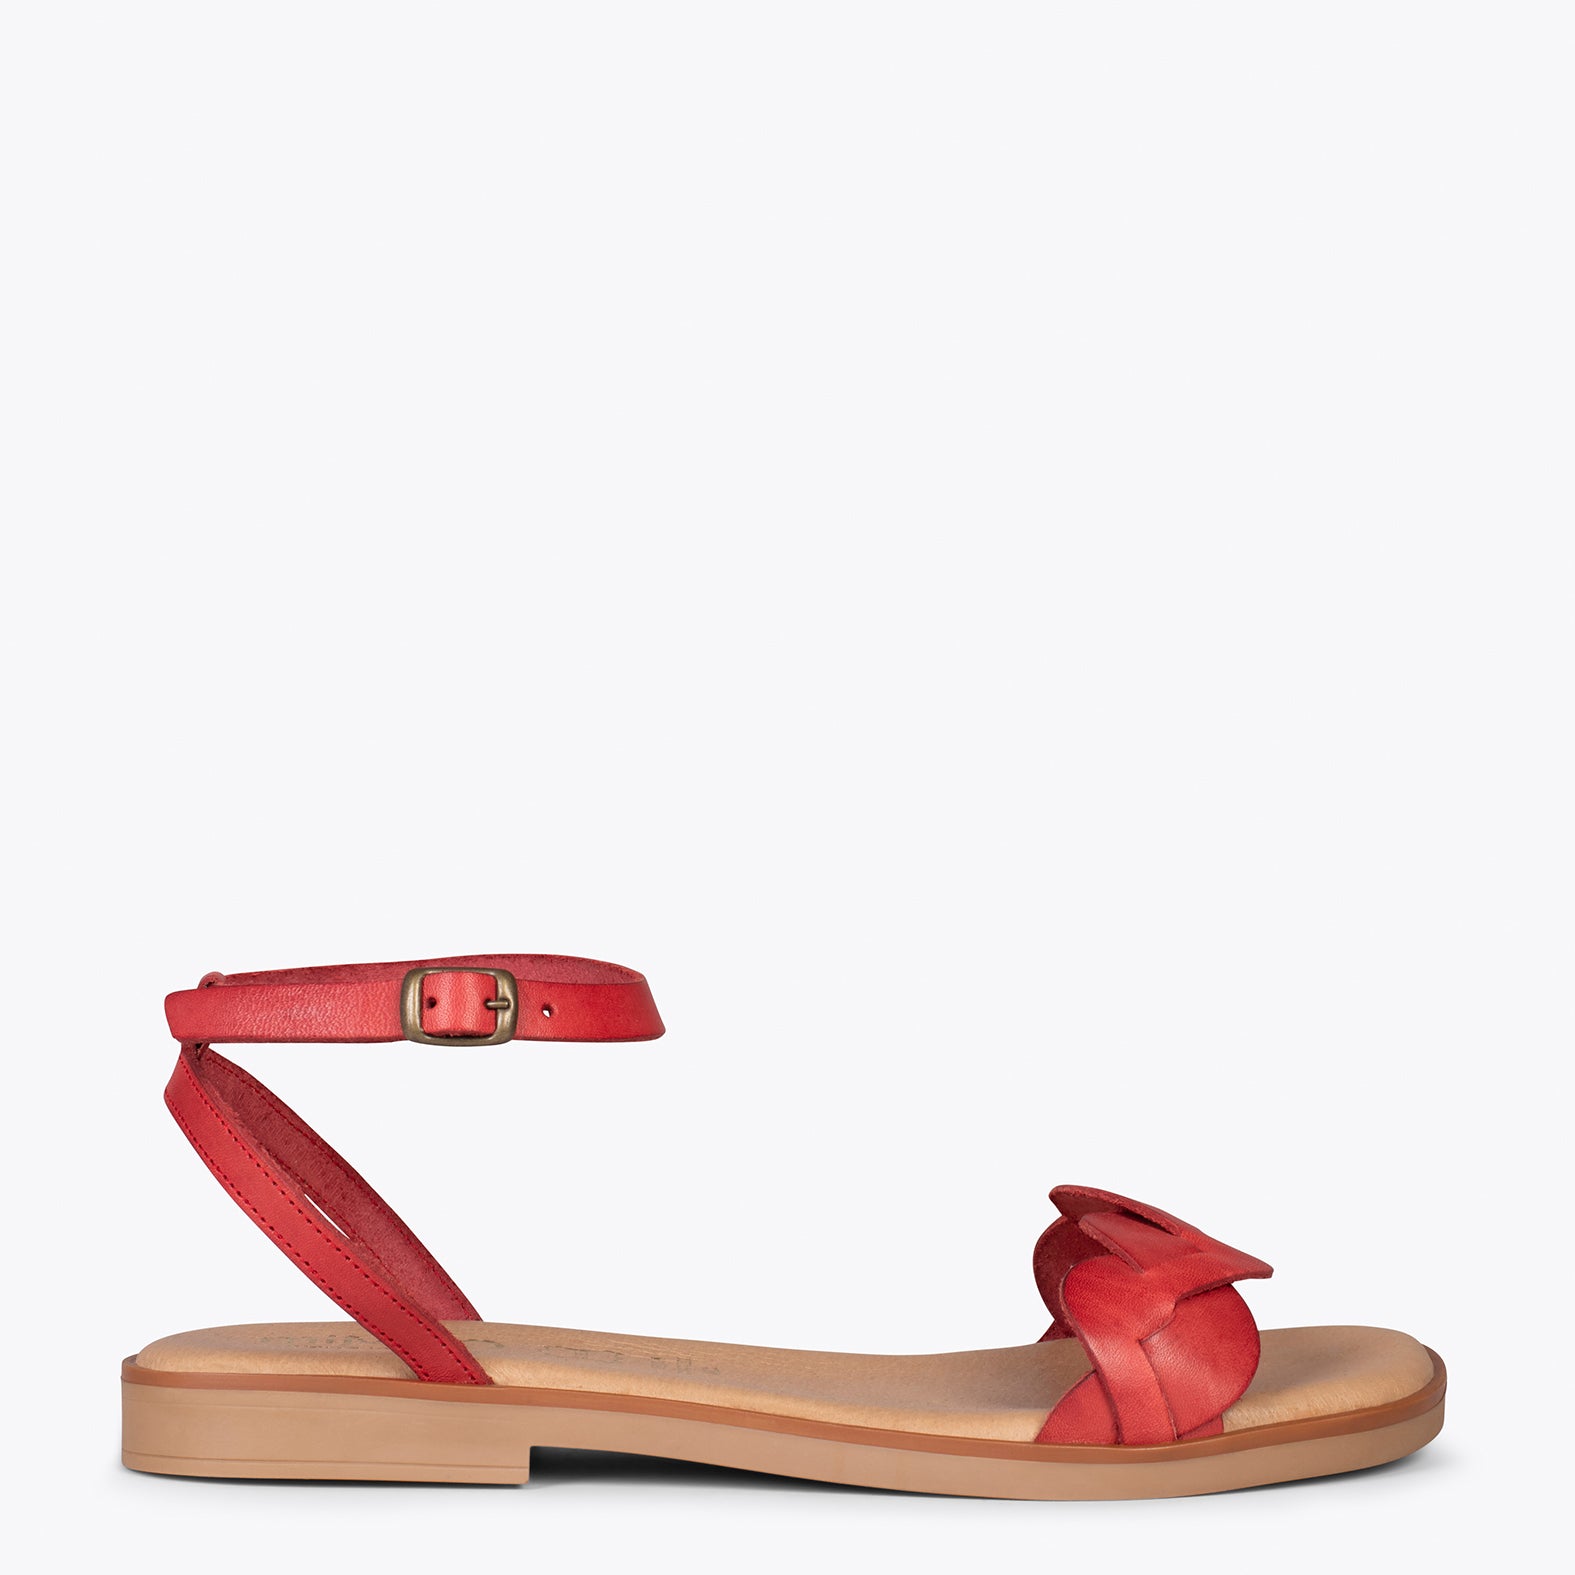 ARECA – RED flat sandal with braided upper